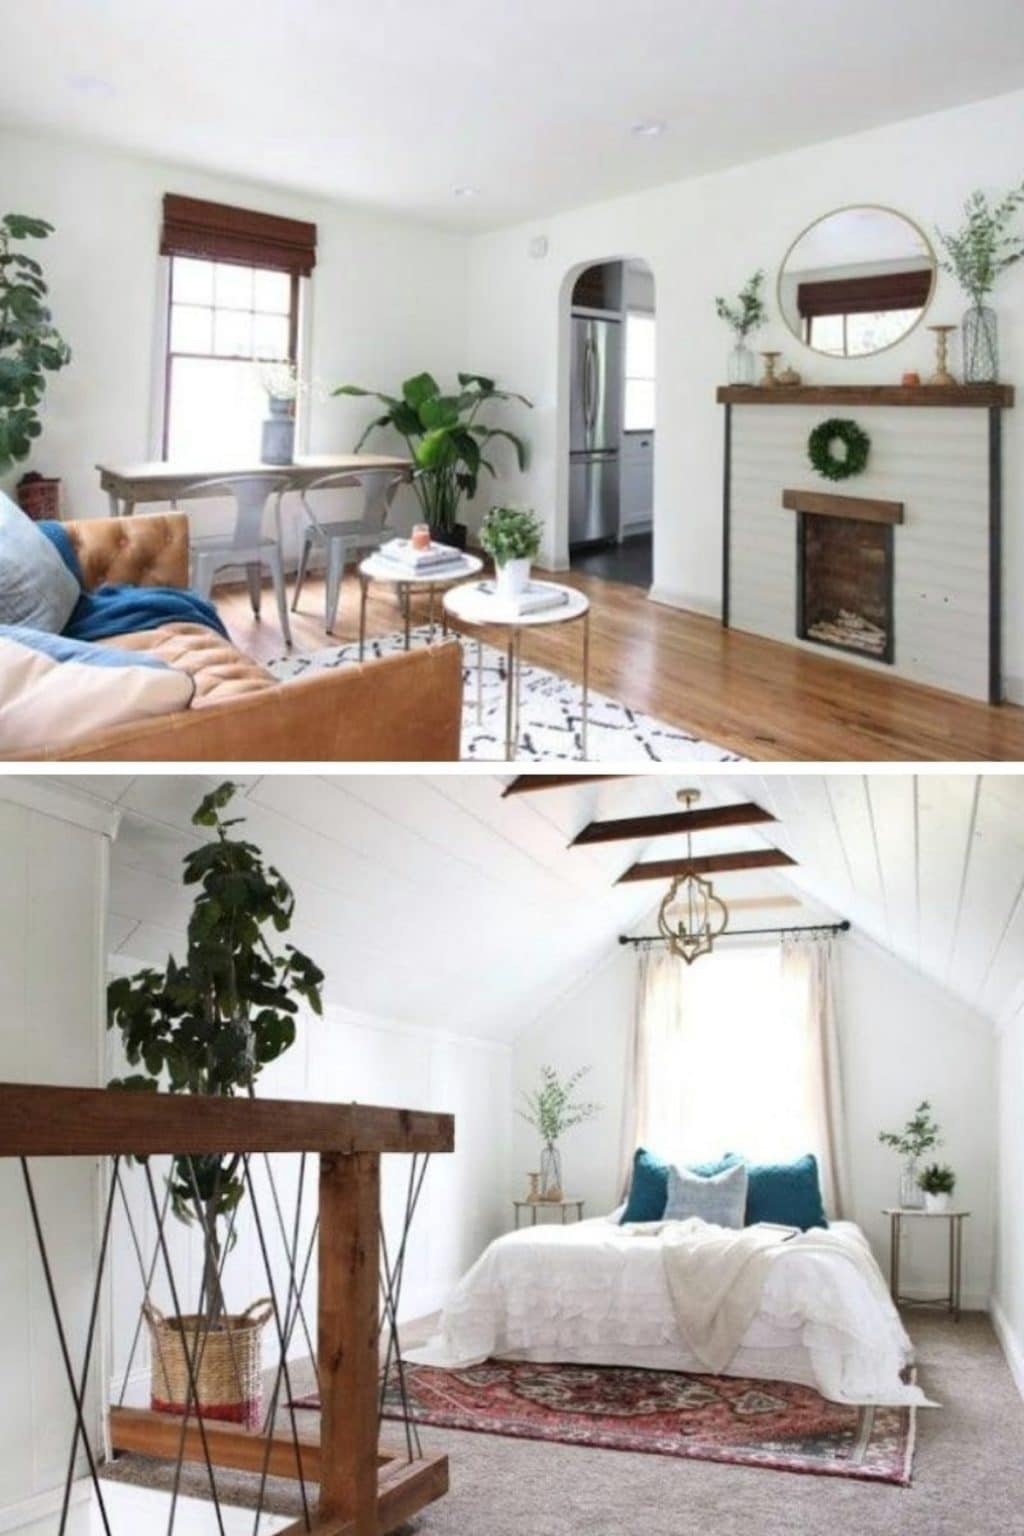 65 Most Spacious Tiny House Designs You'll Love Instantly - Tiny Houses